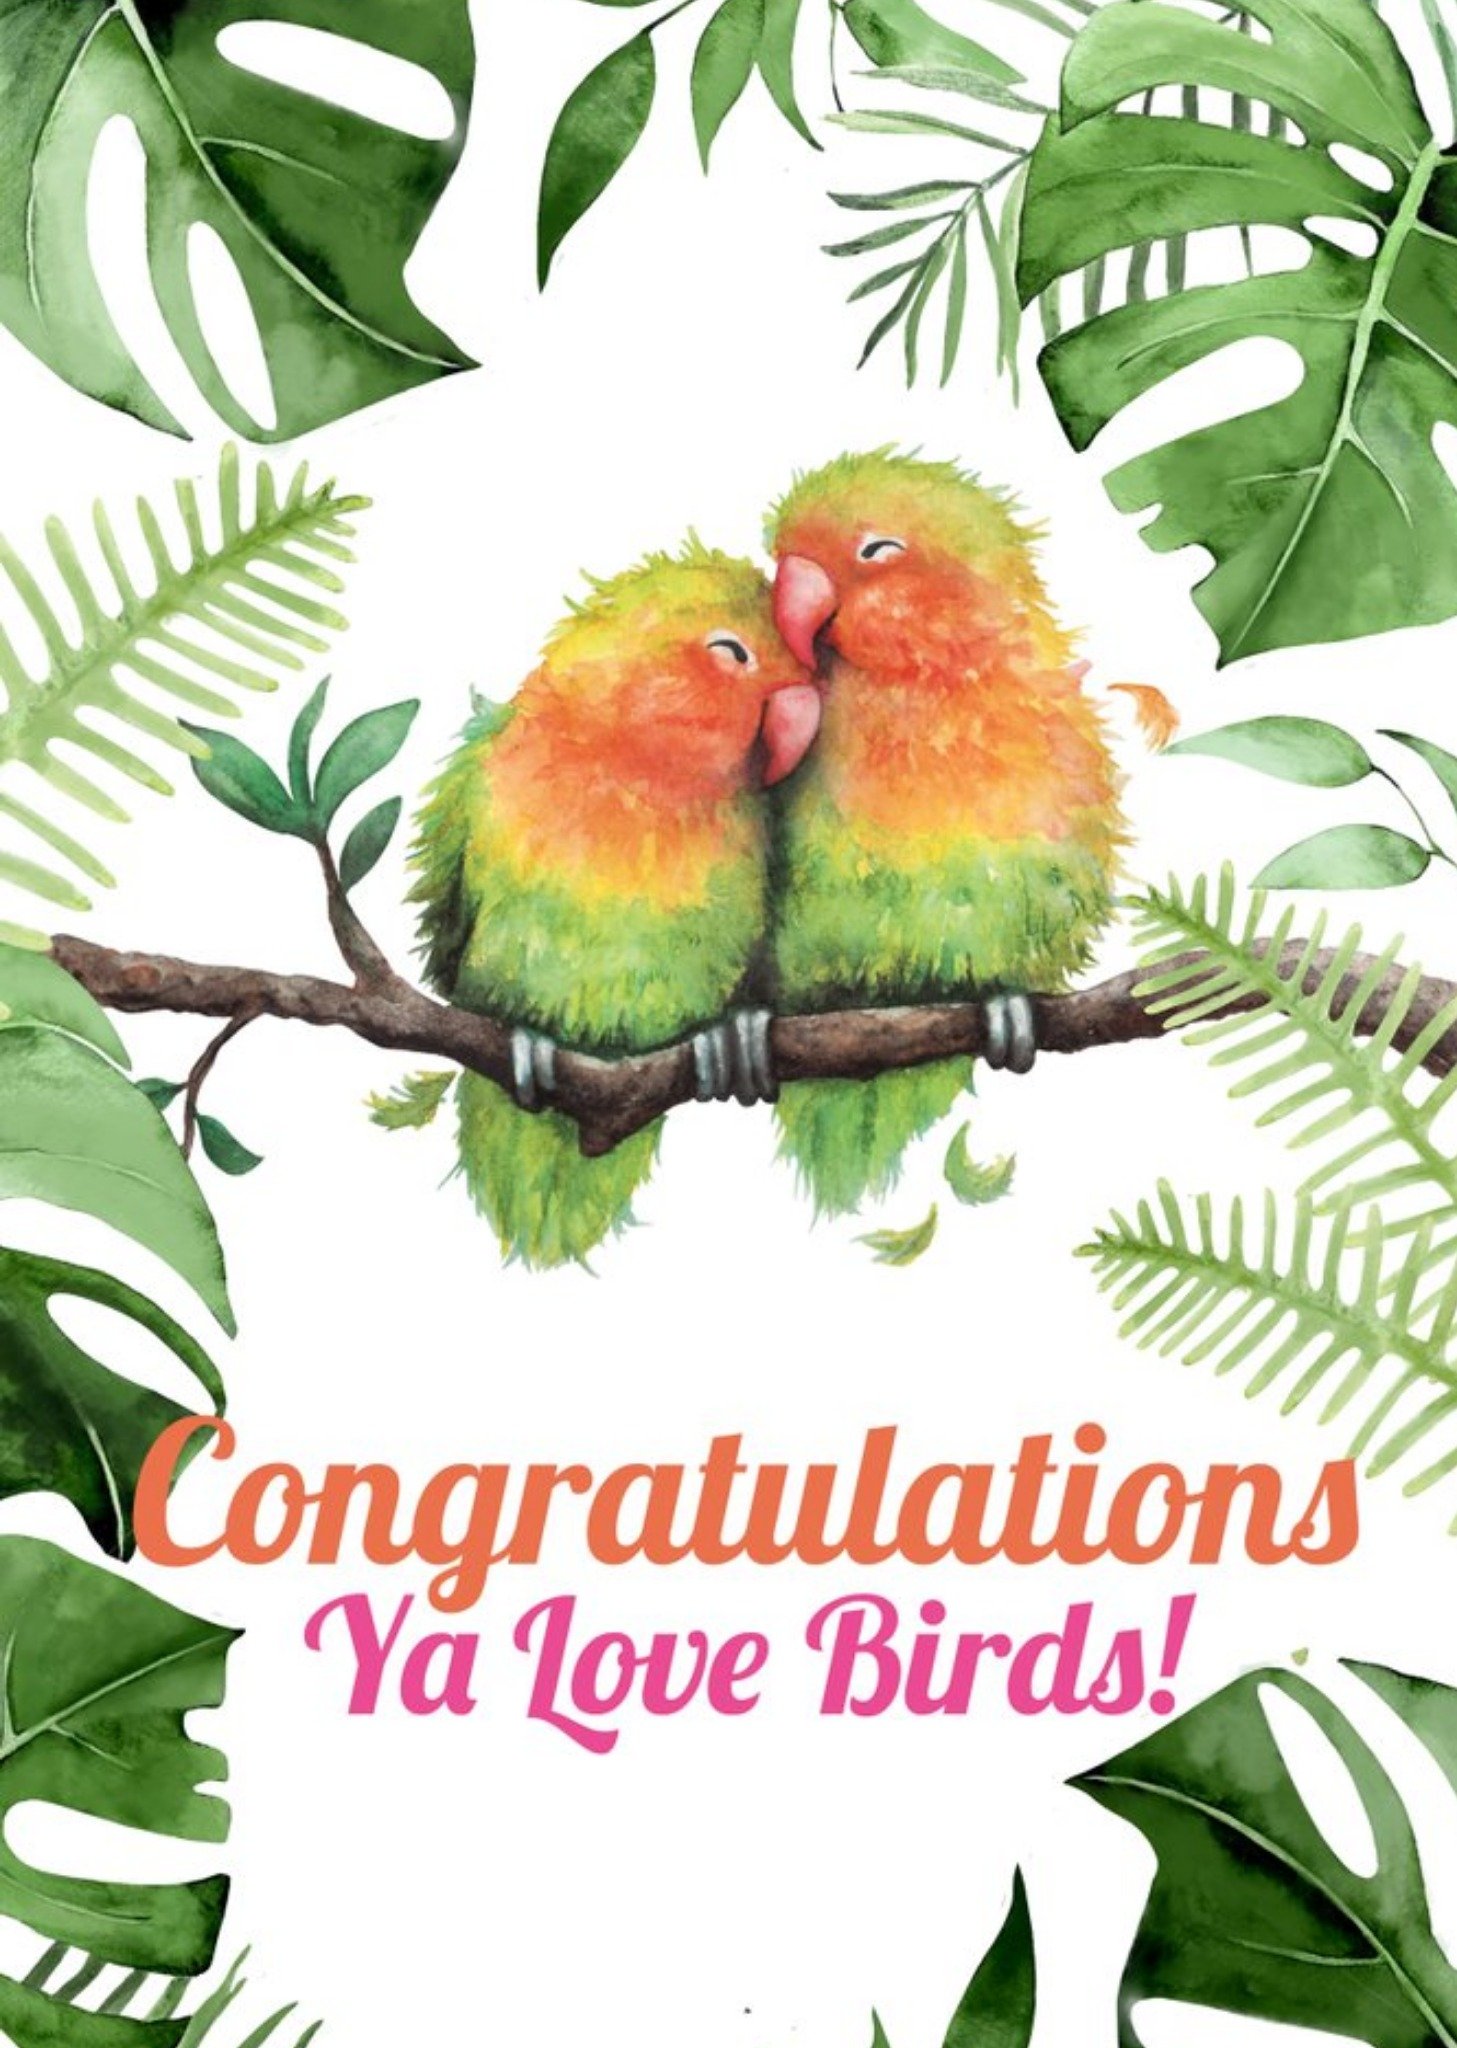 Moonpig Illustration Of A Pair Of Love Birds Surrounded By Foliage Anniversary Card, Large